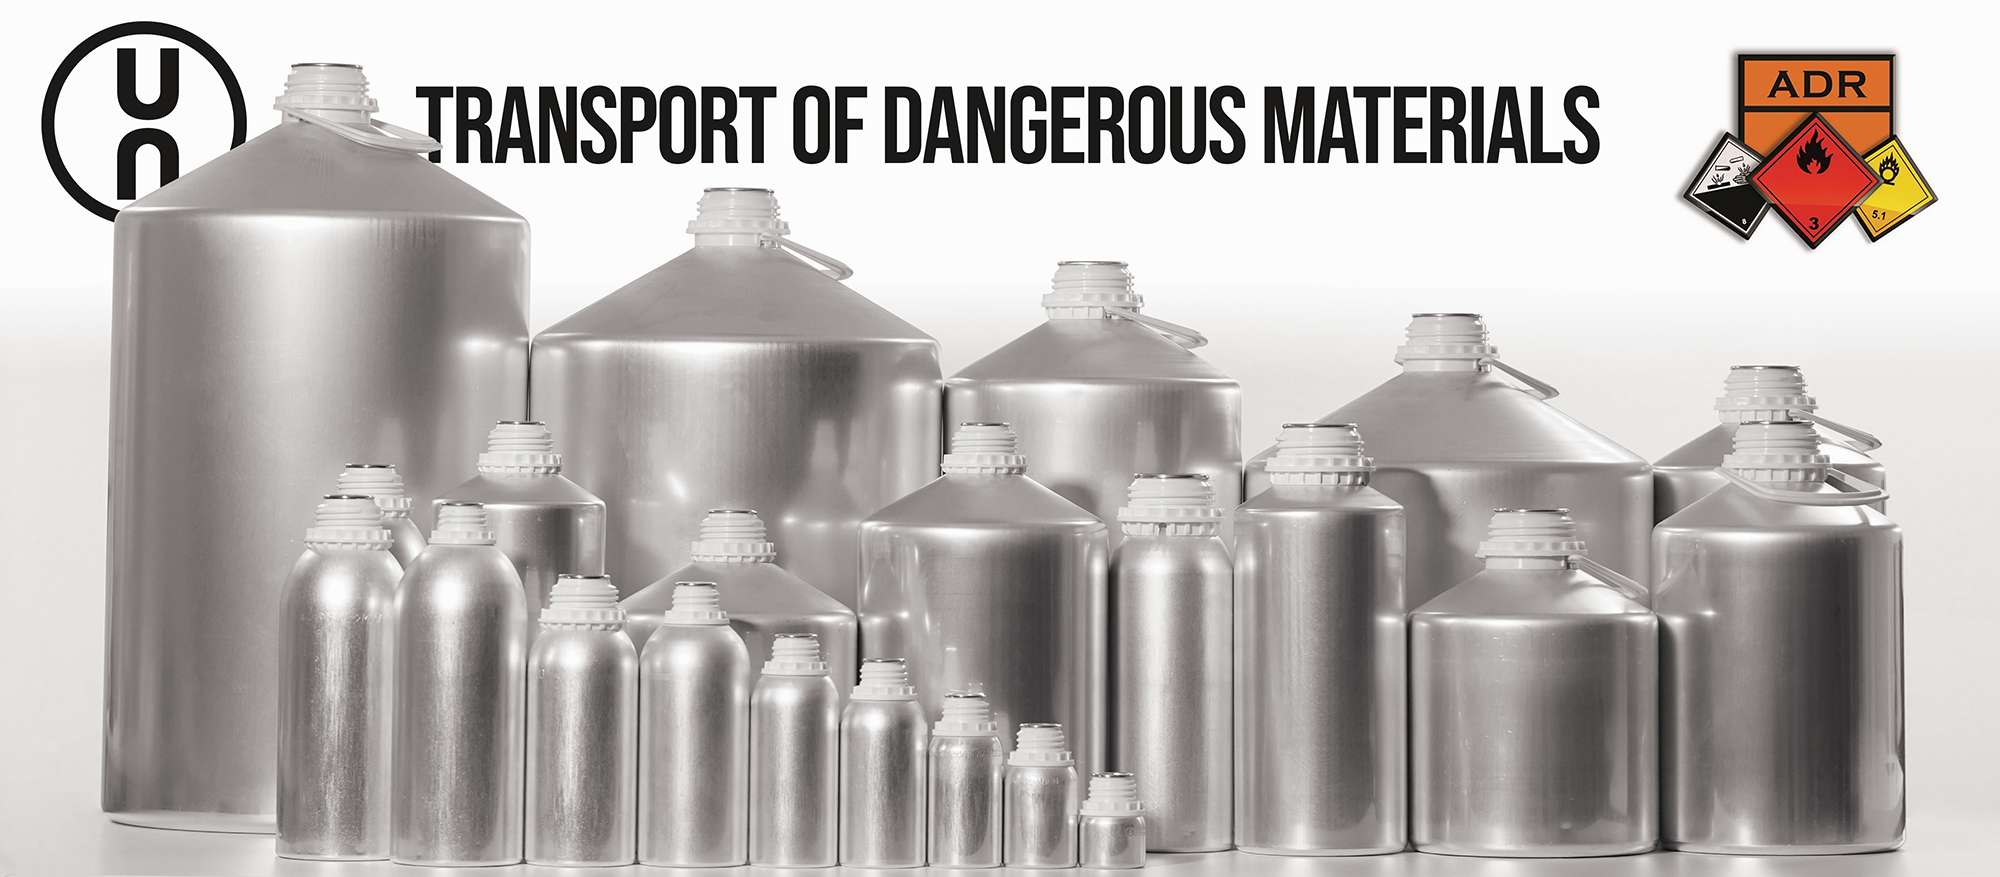 CHOOSE THE MOST SUITABLE PACKAGING TO TRANSPORT YOUR DANGEROUS GOODS